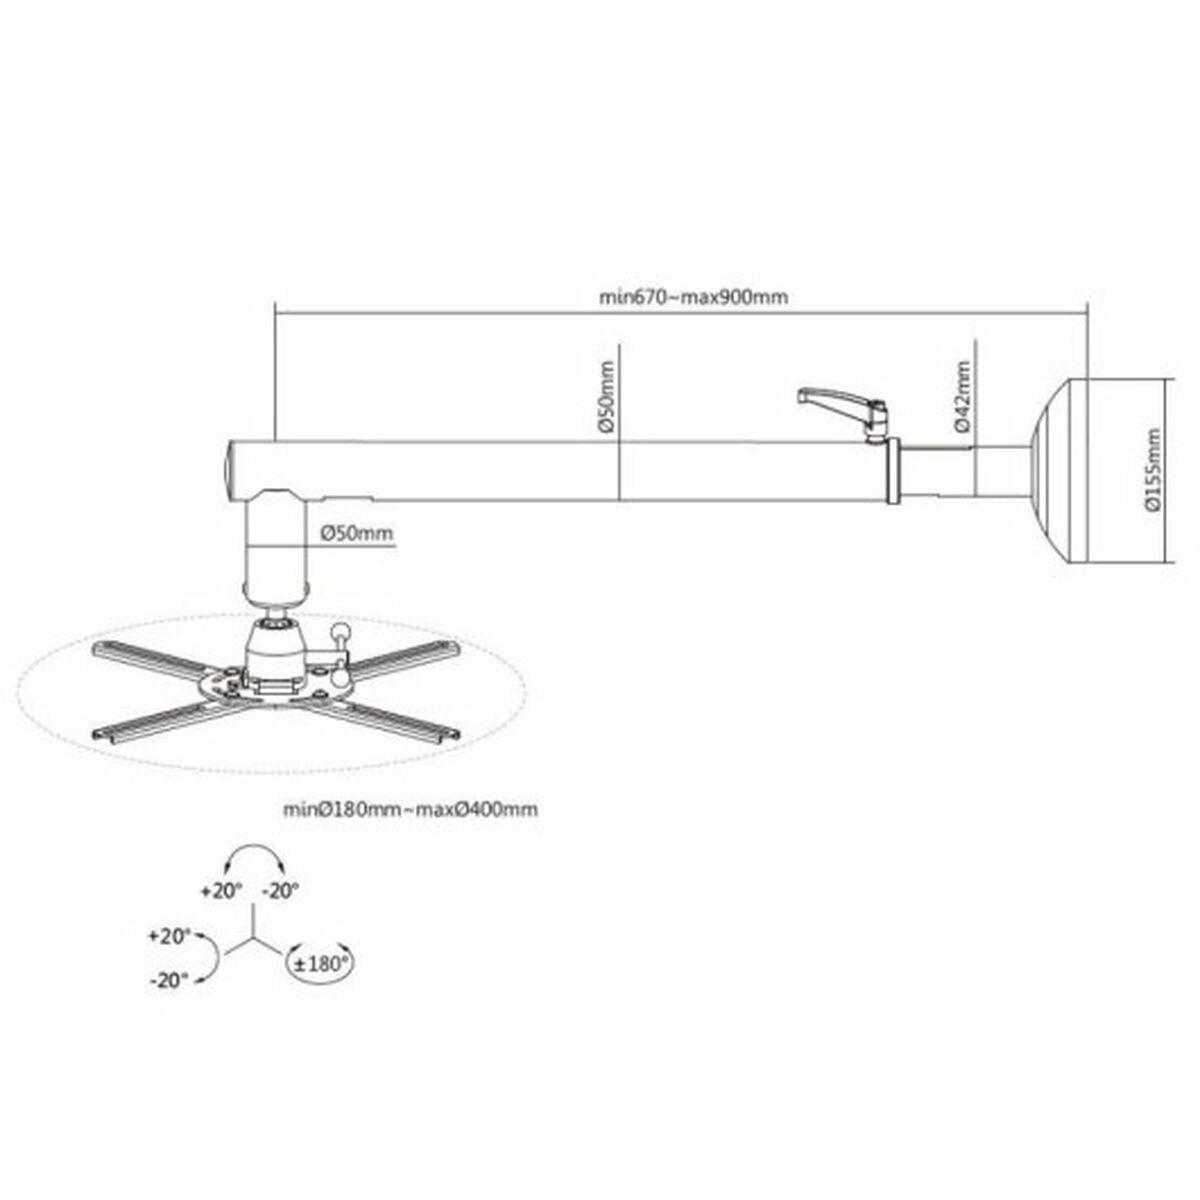 Tilt and Swivel Ceiling Mount for Projectors Equip 650704